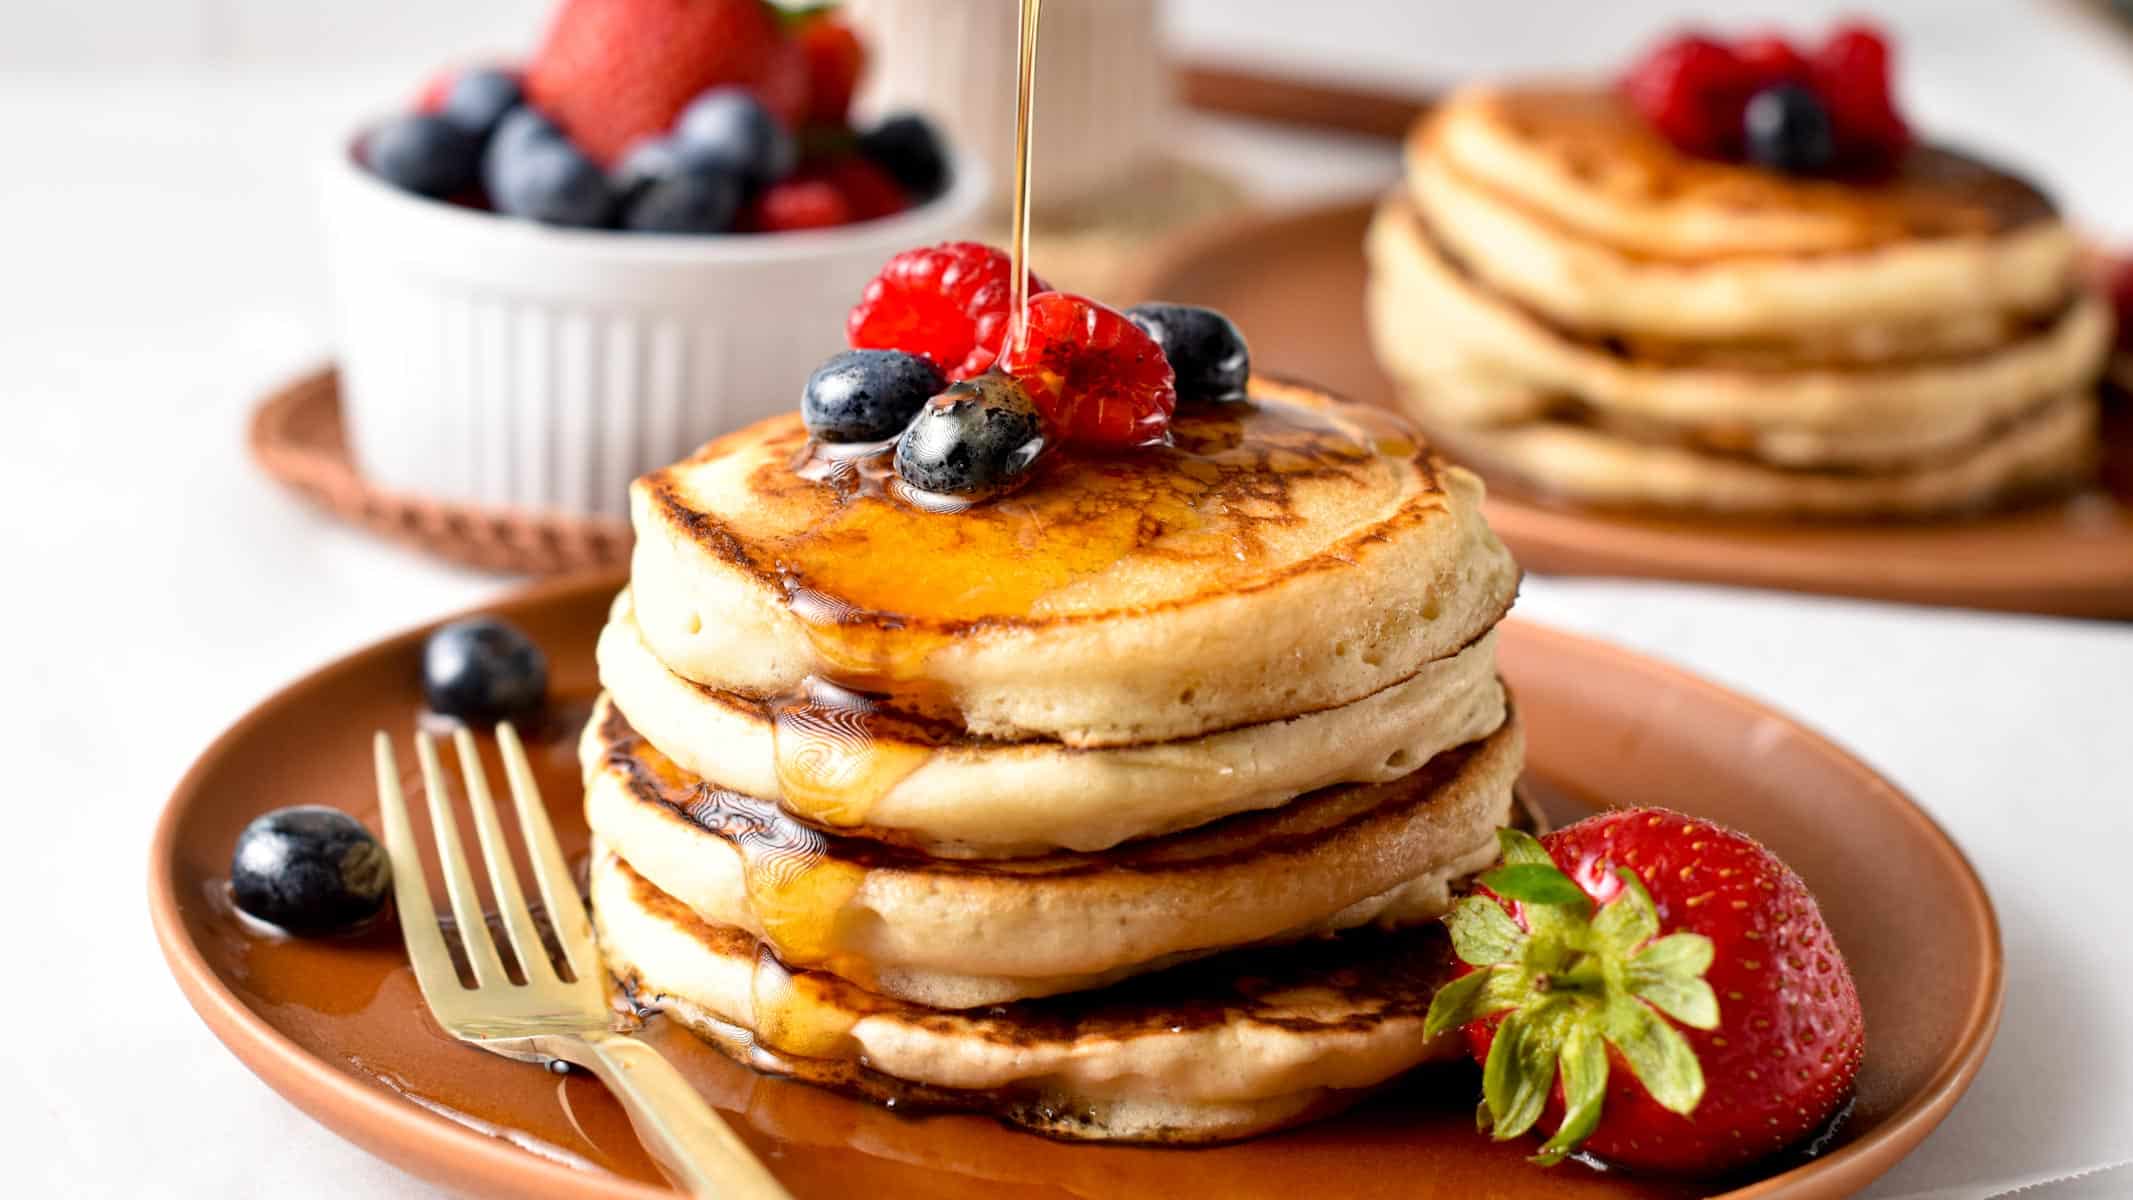 These eggless pancakes are easy fluffy pancakes perfect for an egg-free breakfast, Plus, these pancakes are also dairy-free and therefore vegan friendly so you can share them with all the family.